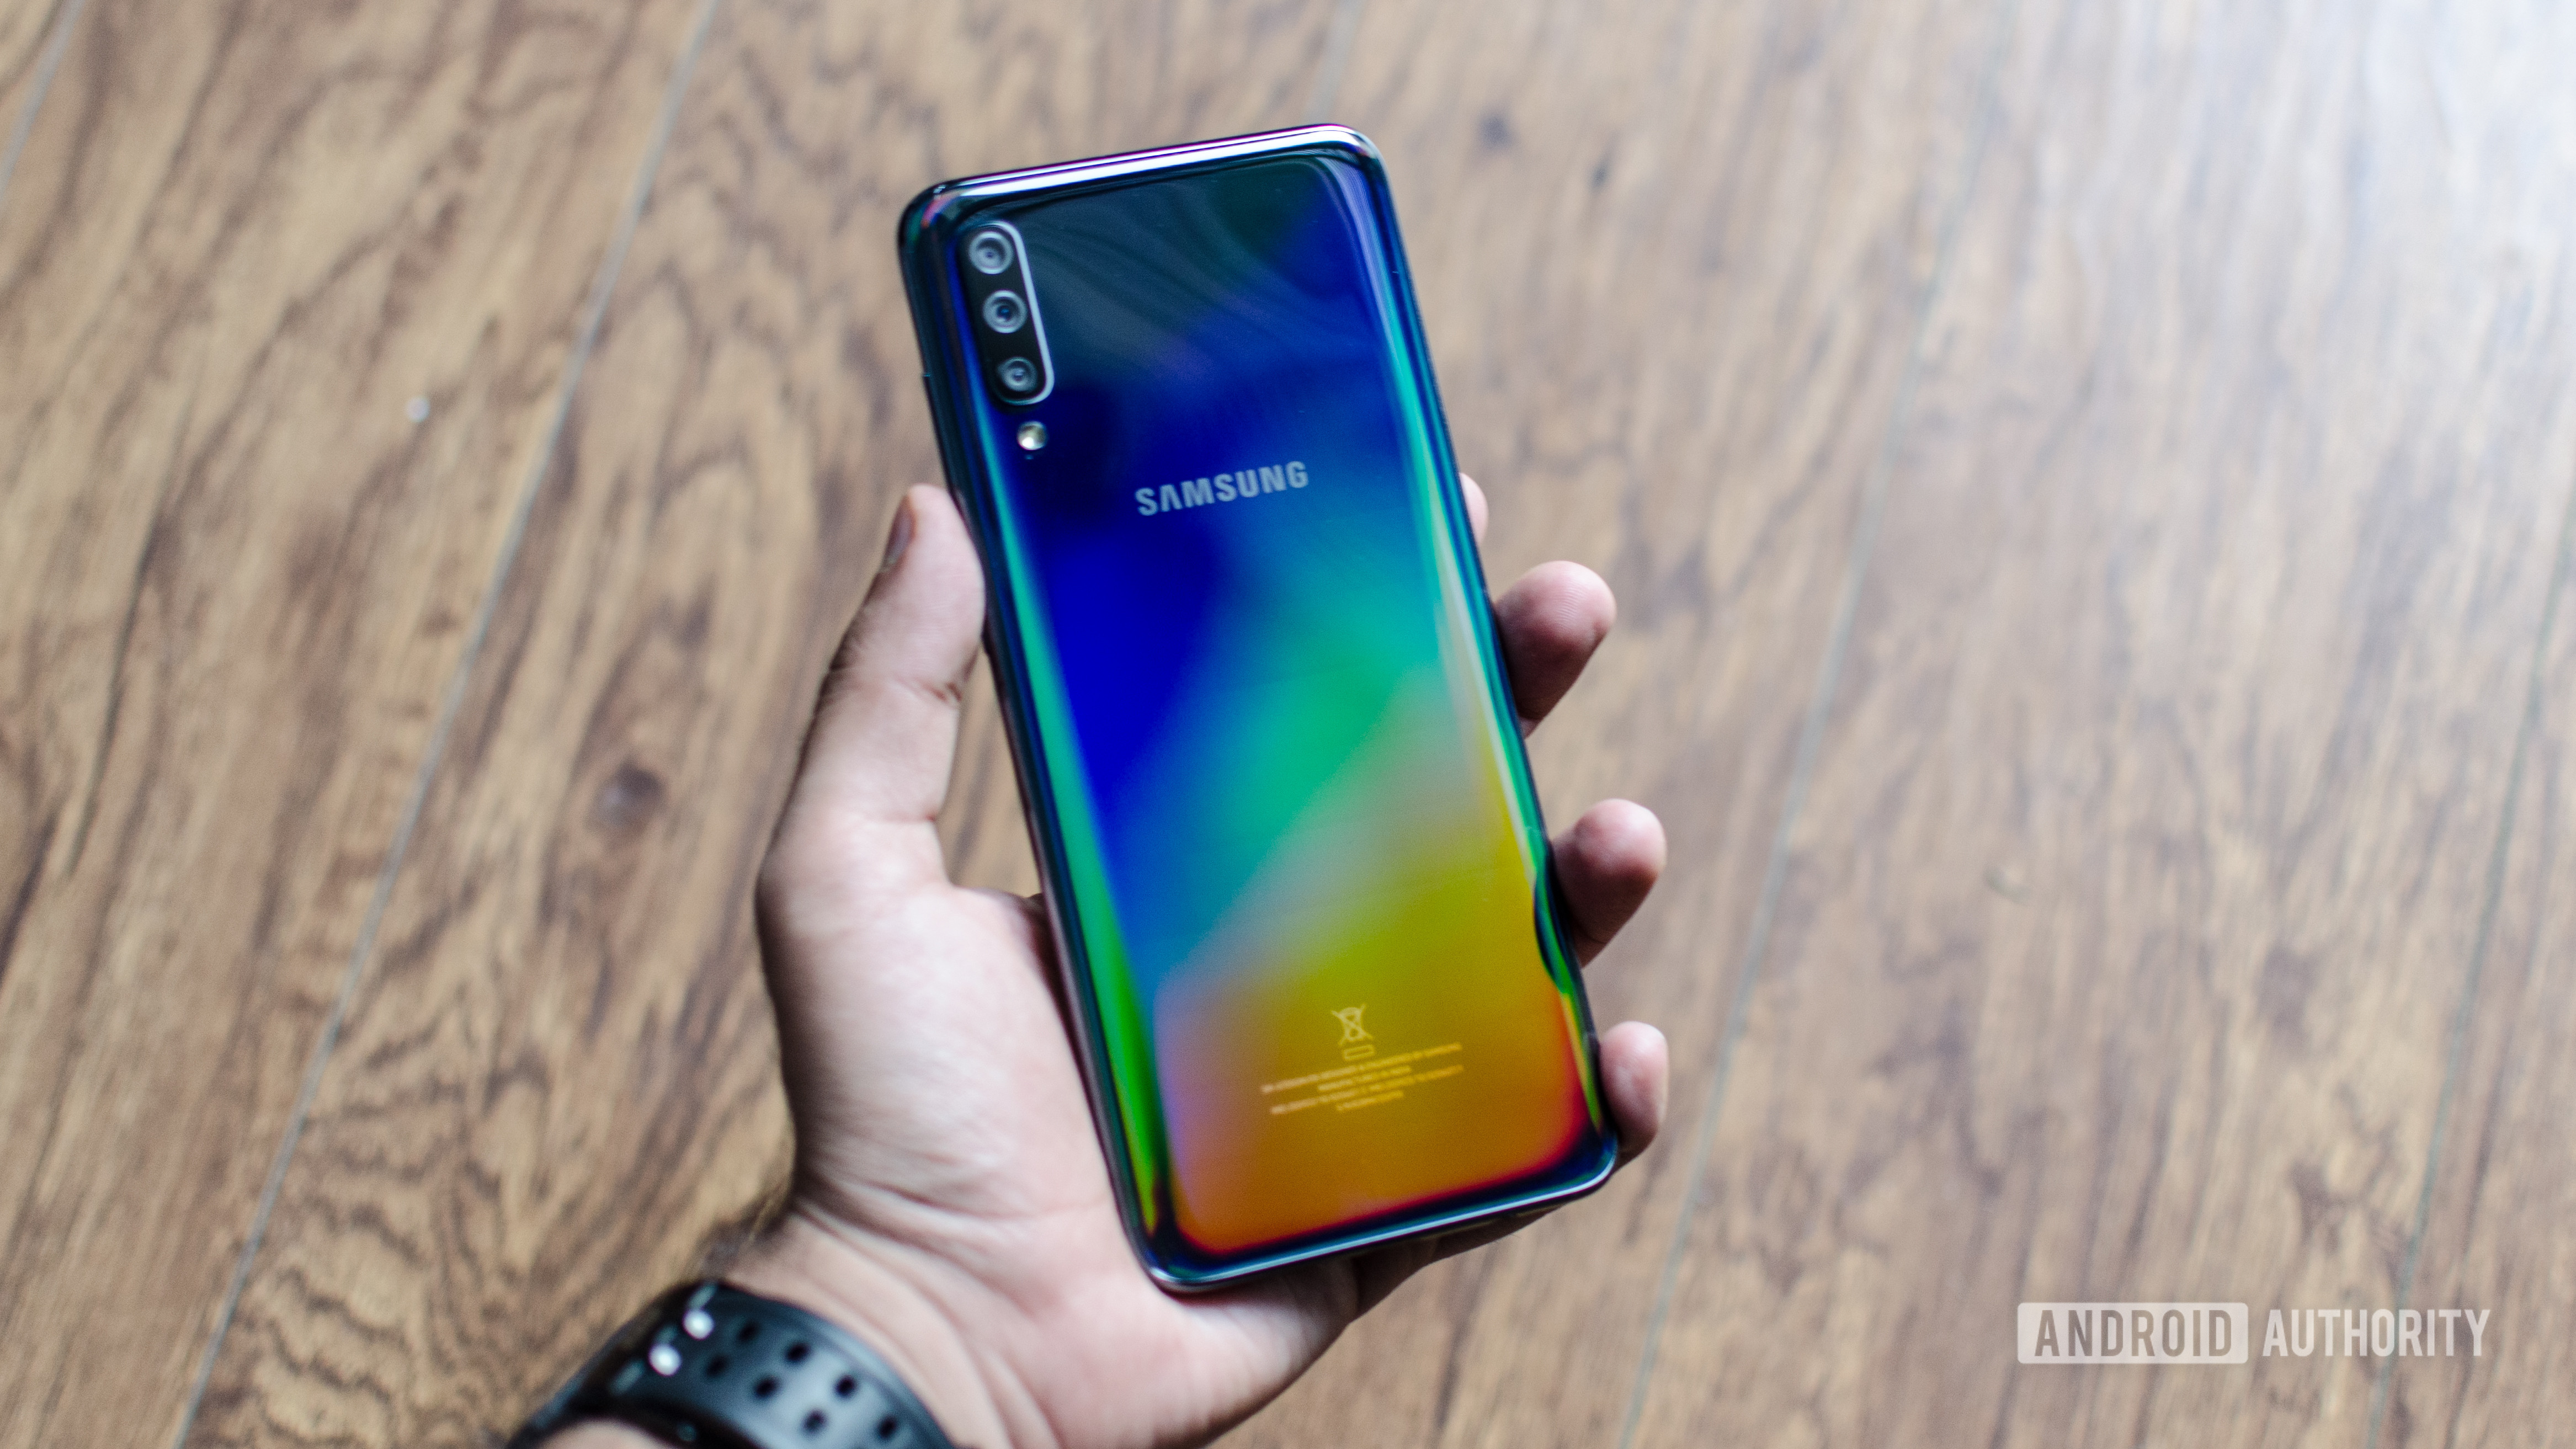 Samsung Galaxy A70 in hand showing back